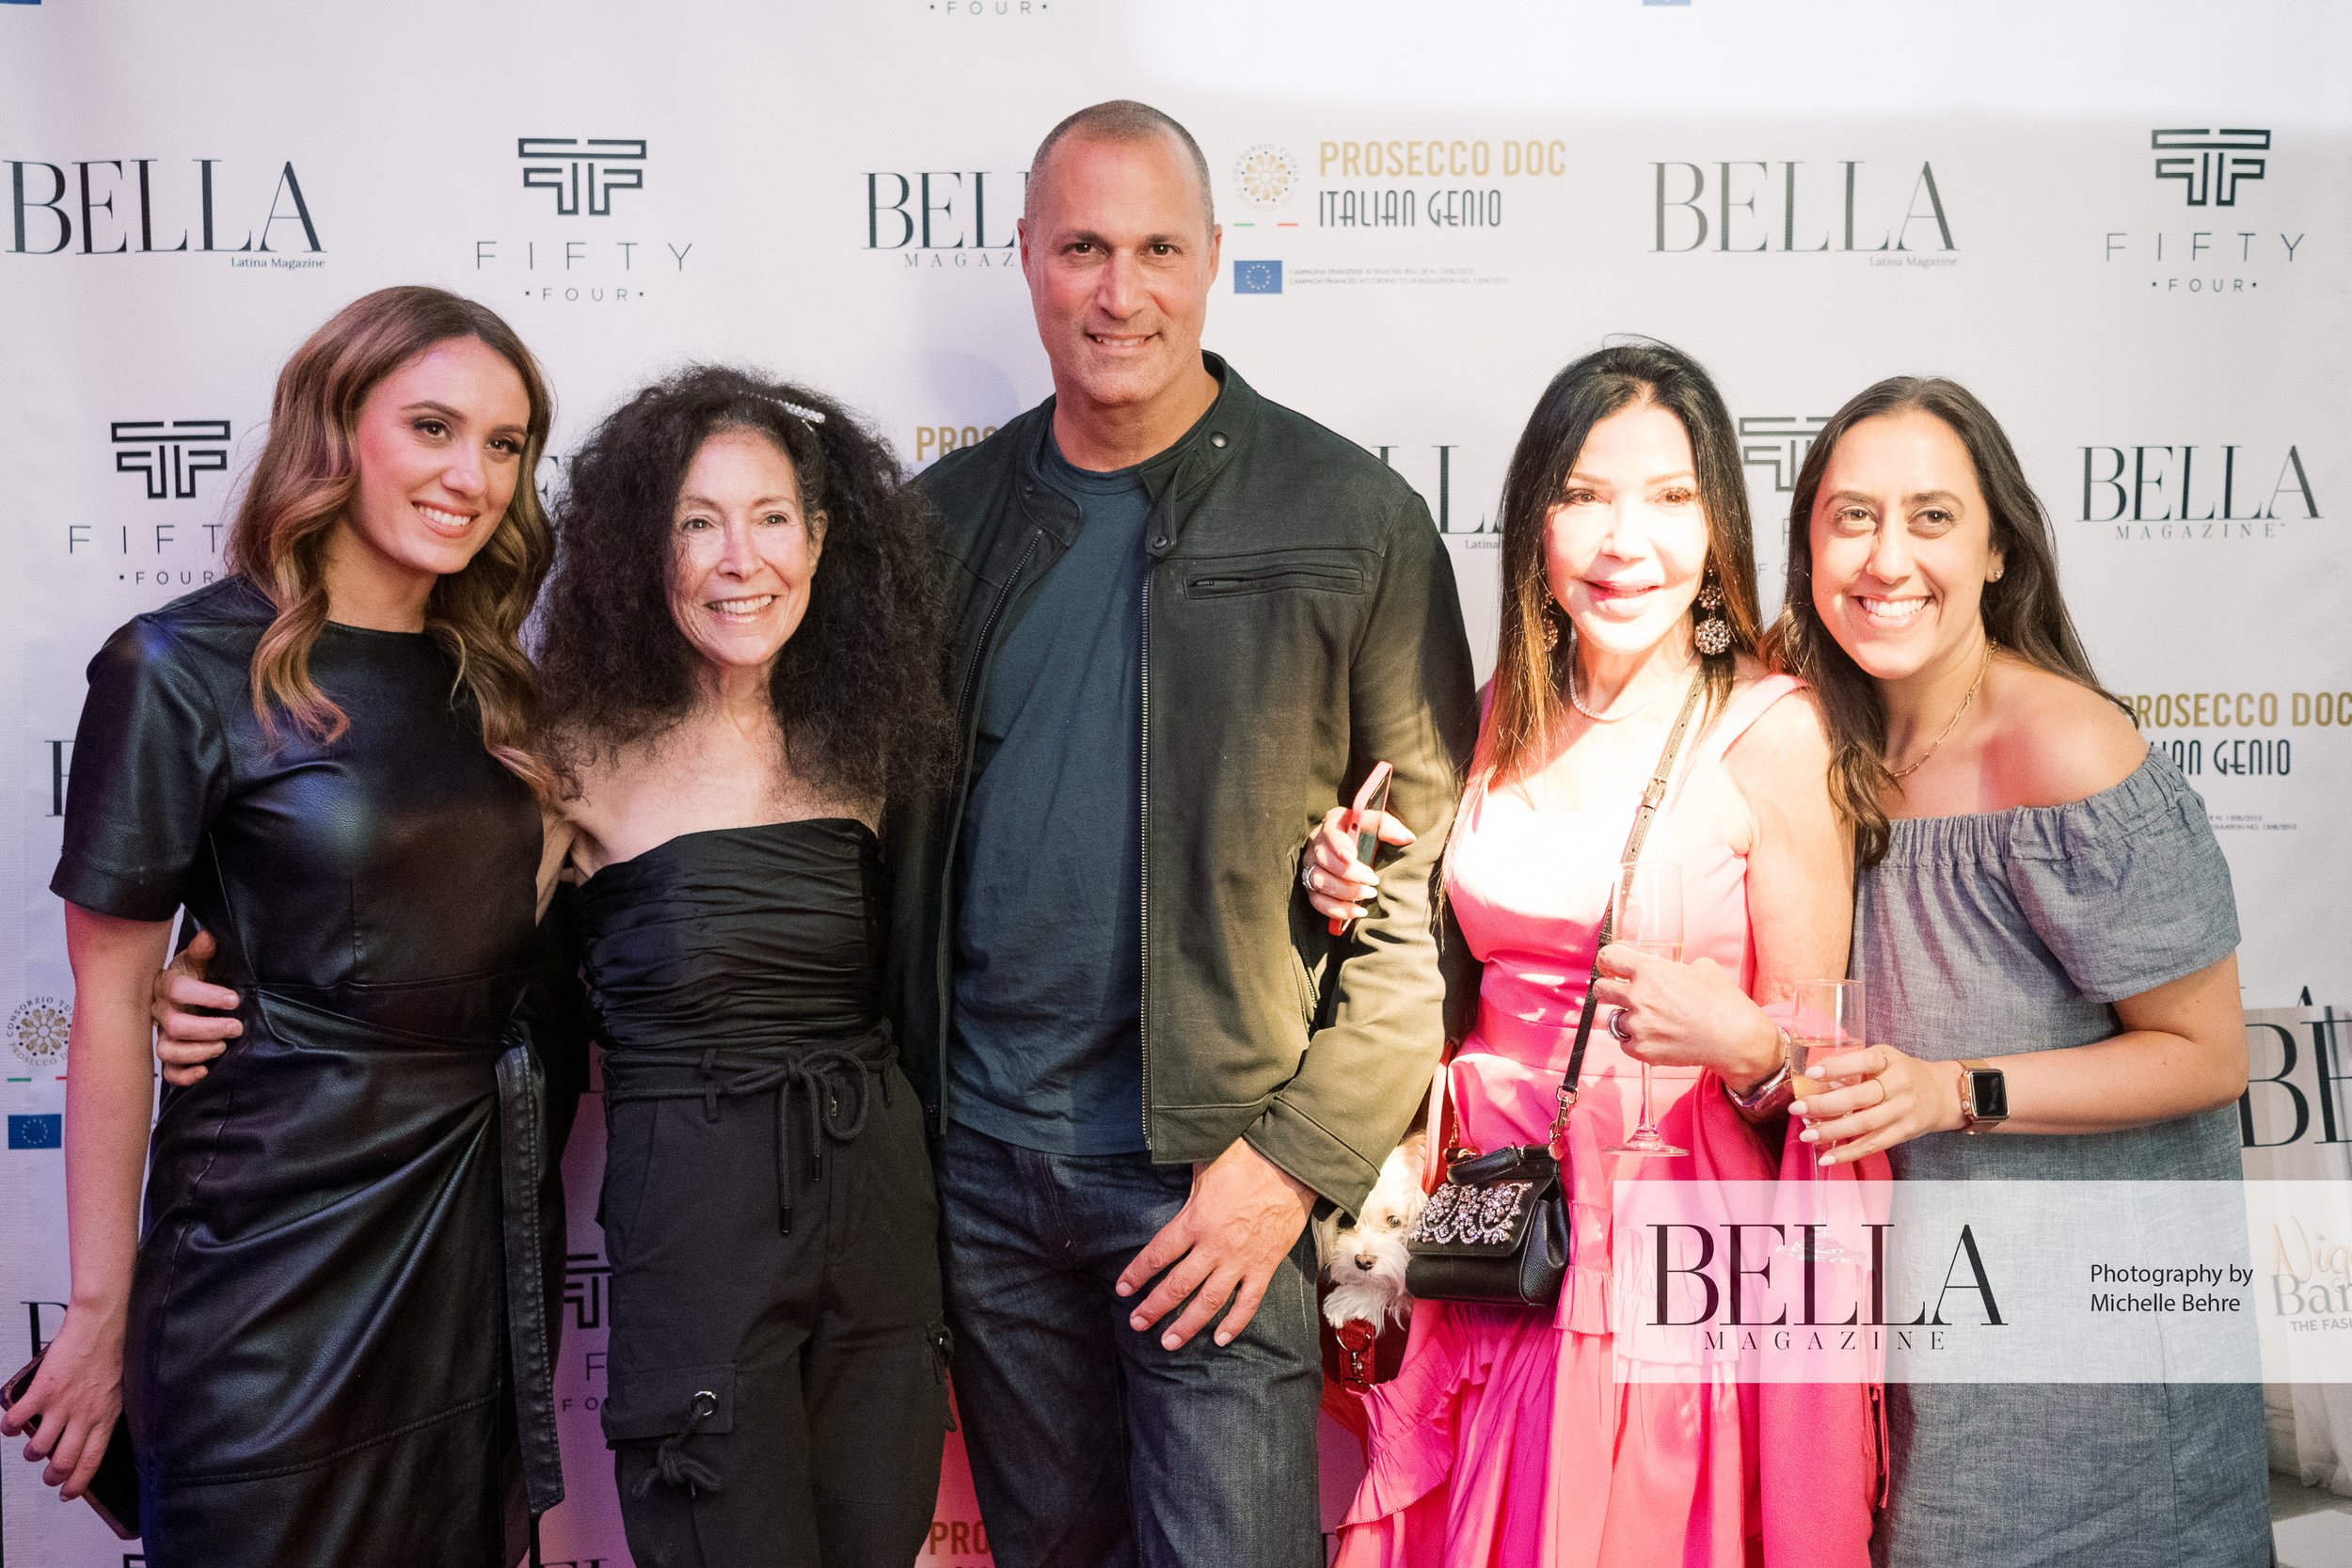 BELLA-Magazine-September-Issue-Cover-Event-Fifty-Four-255 2.jpg